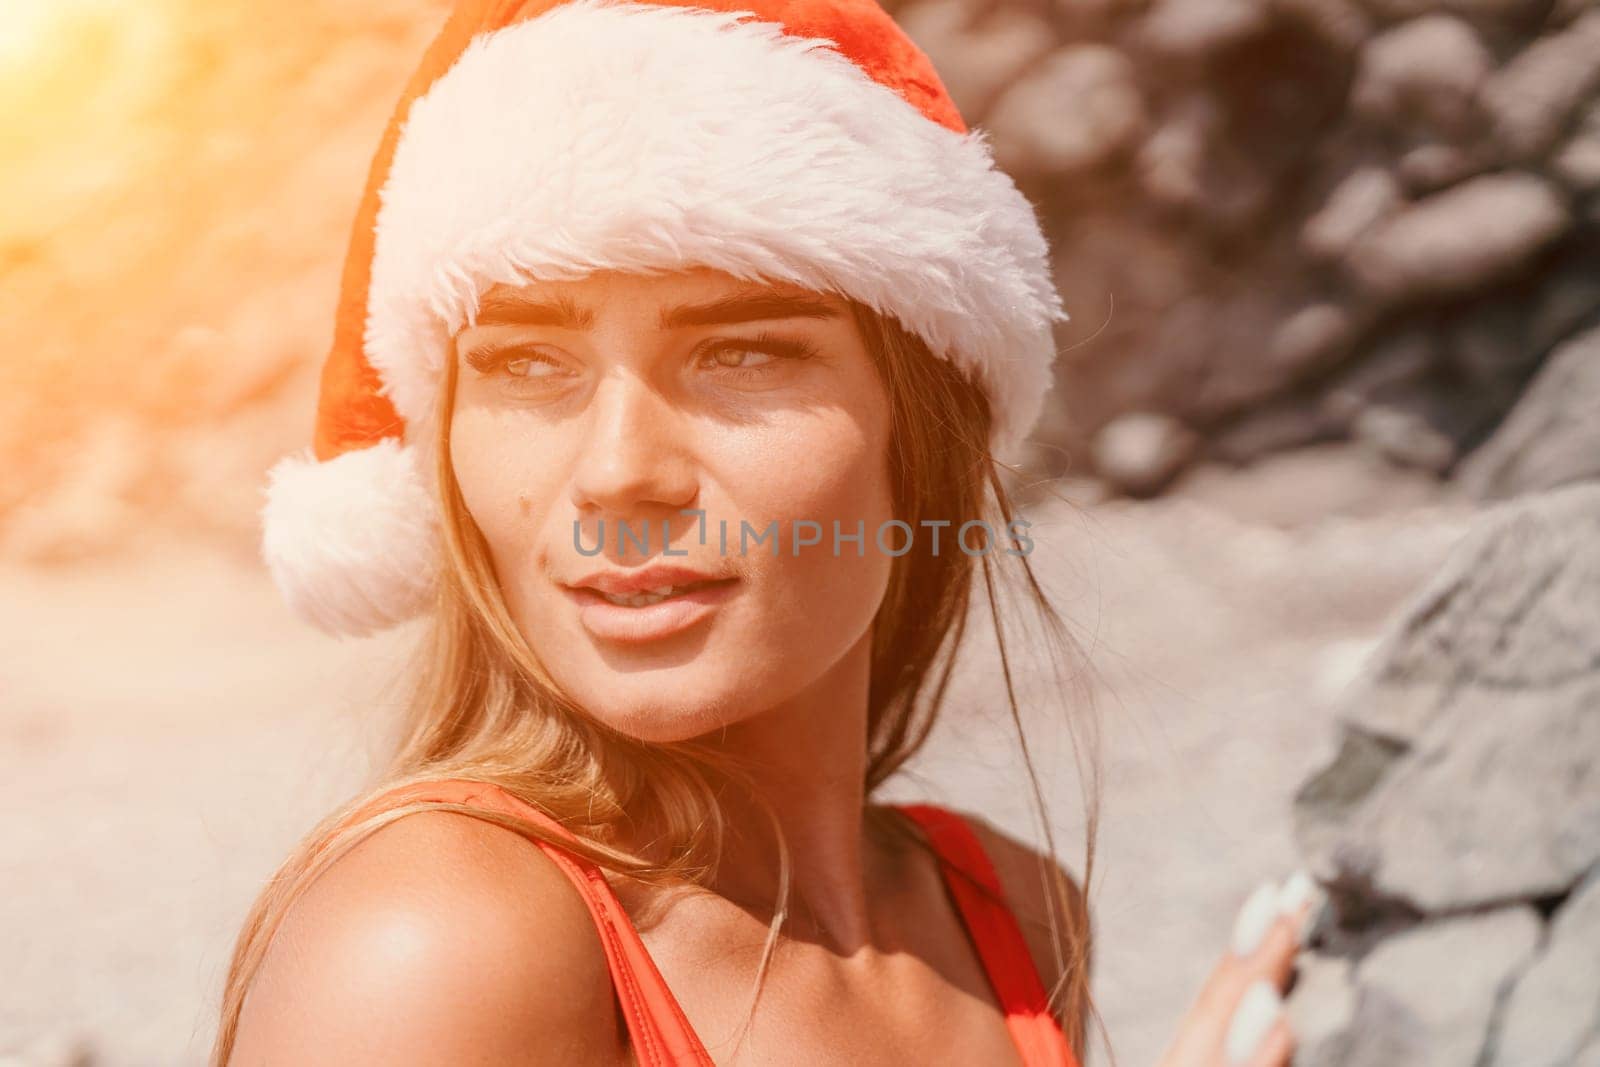 Woman summer travel sea. Happy tourist in red bikini and Santas hat enjoy taking picture outdoors for memories. Woman traveler posing on the beach surrounded by volcanic mountains, sharing travel joy by panophotograph